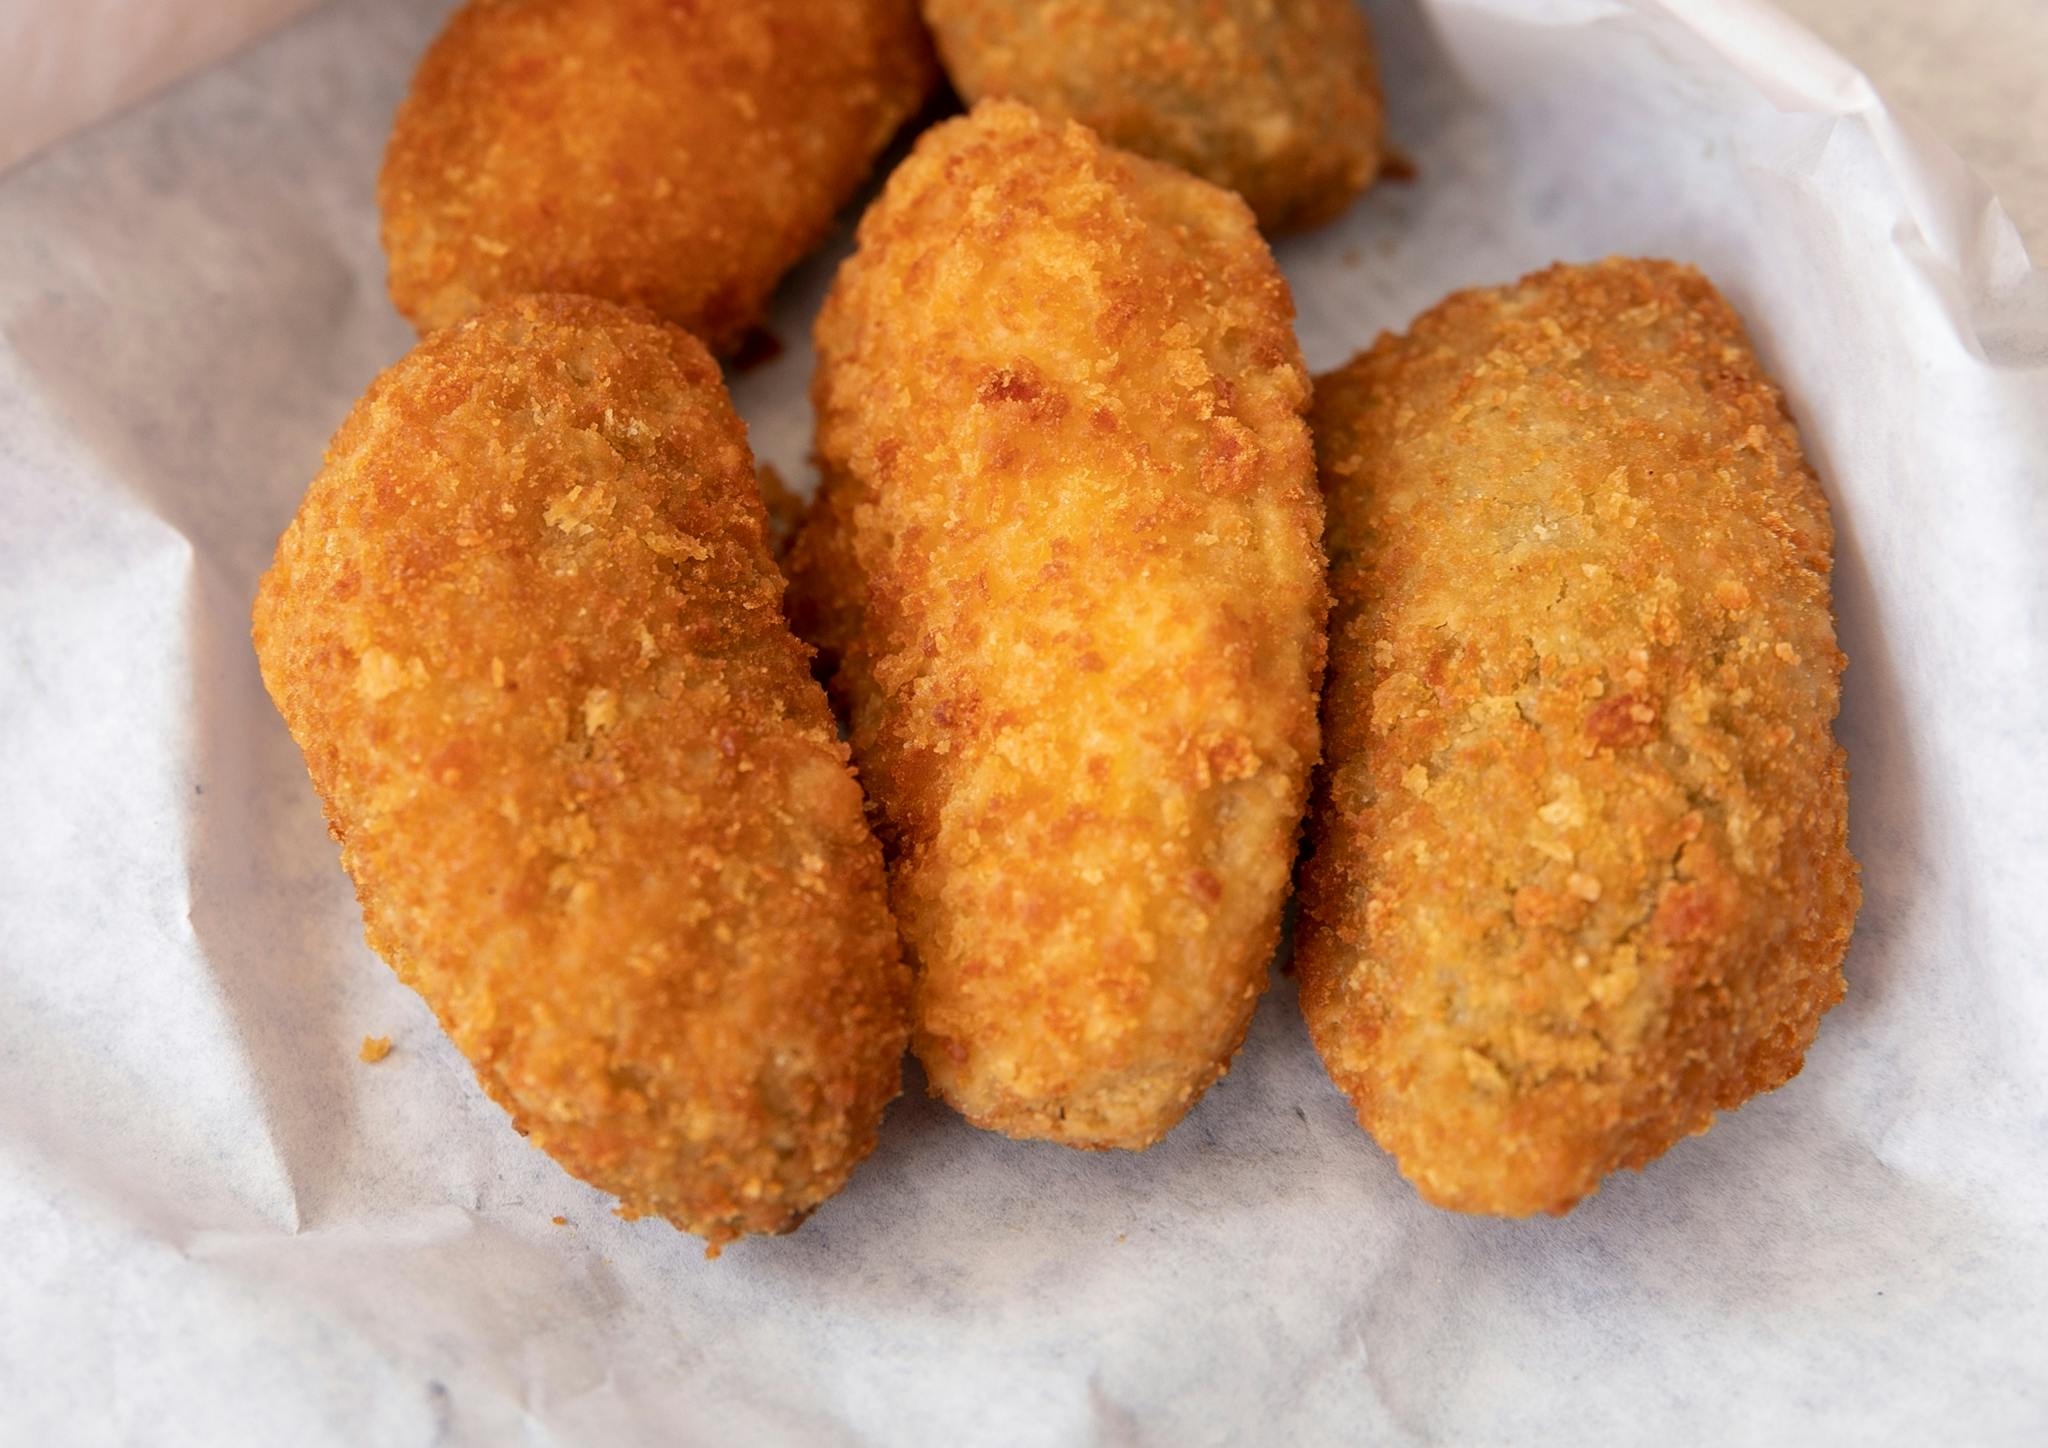 Jalapeno Poppers from Niko's Gyros in Appleton, WI